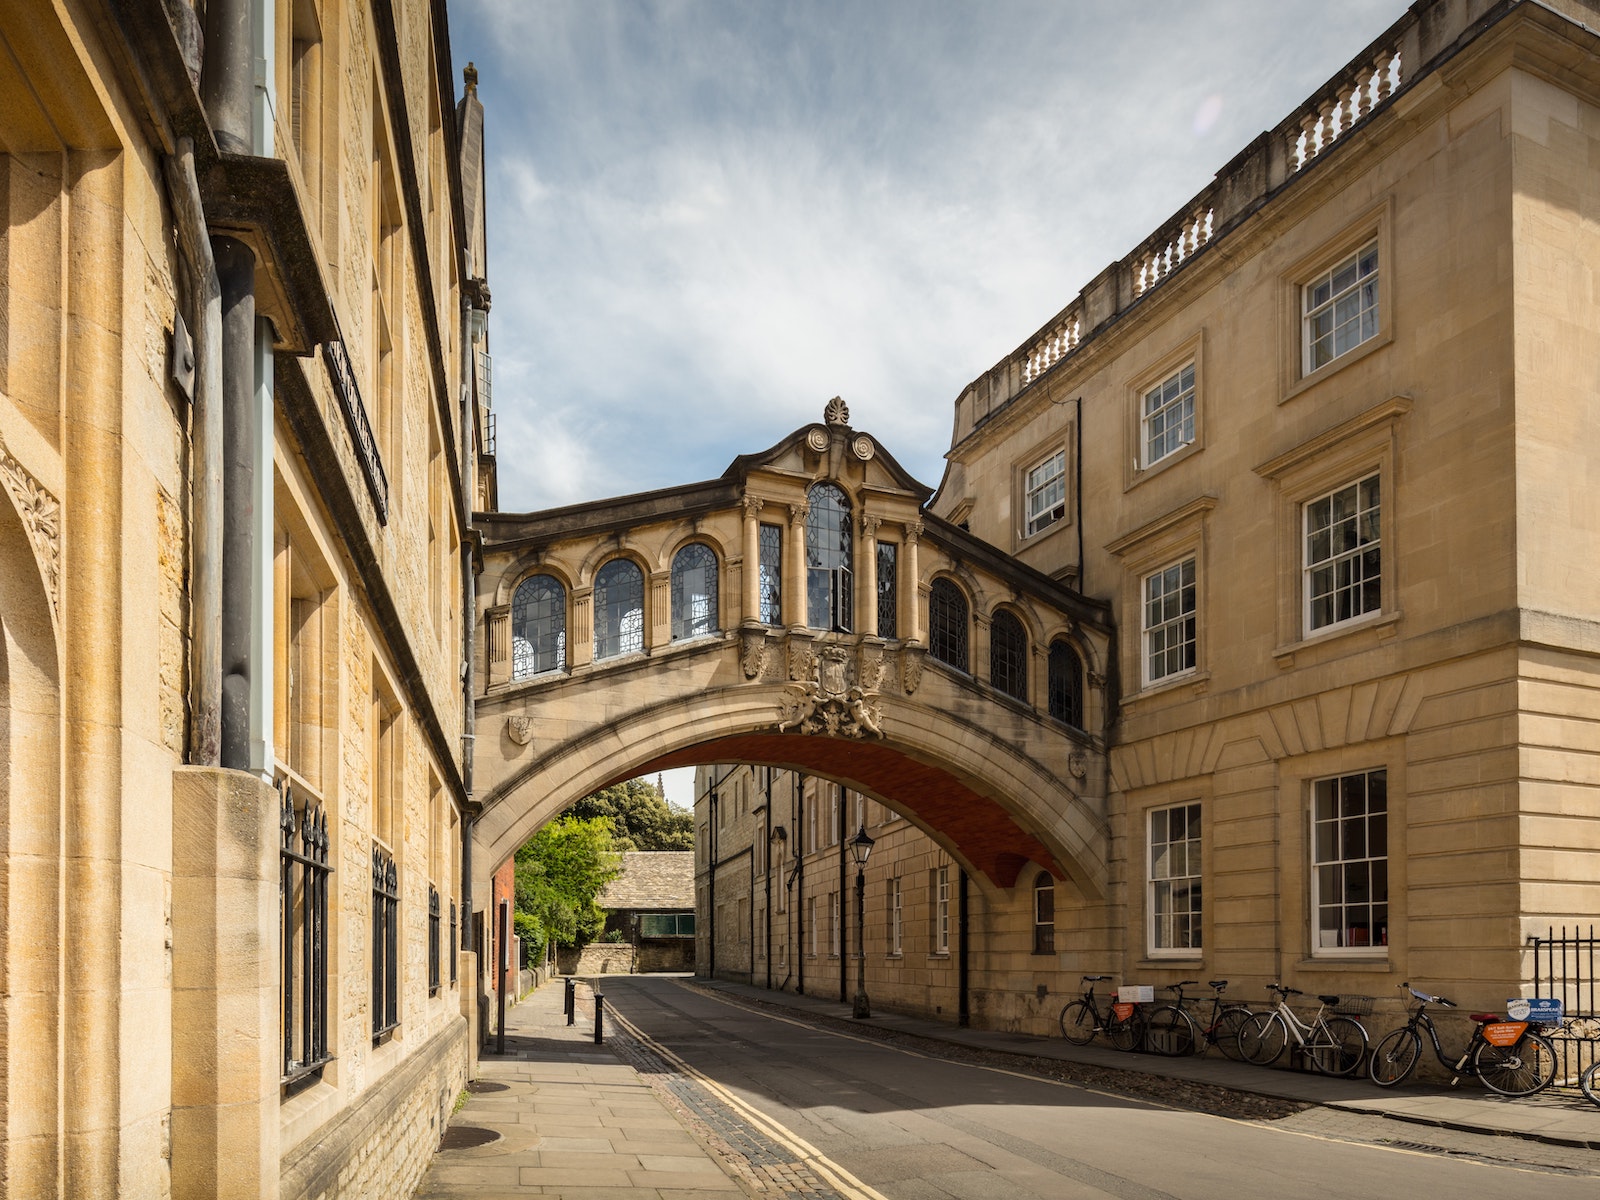 9 Things to Do in Oxford on a Day Trip from London